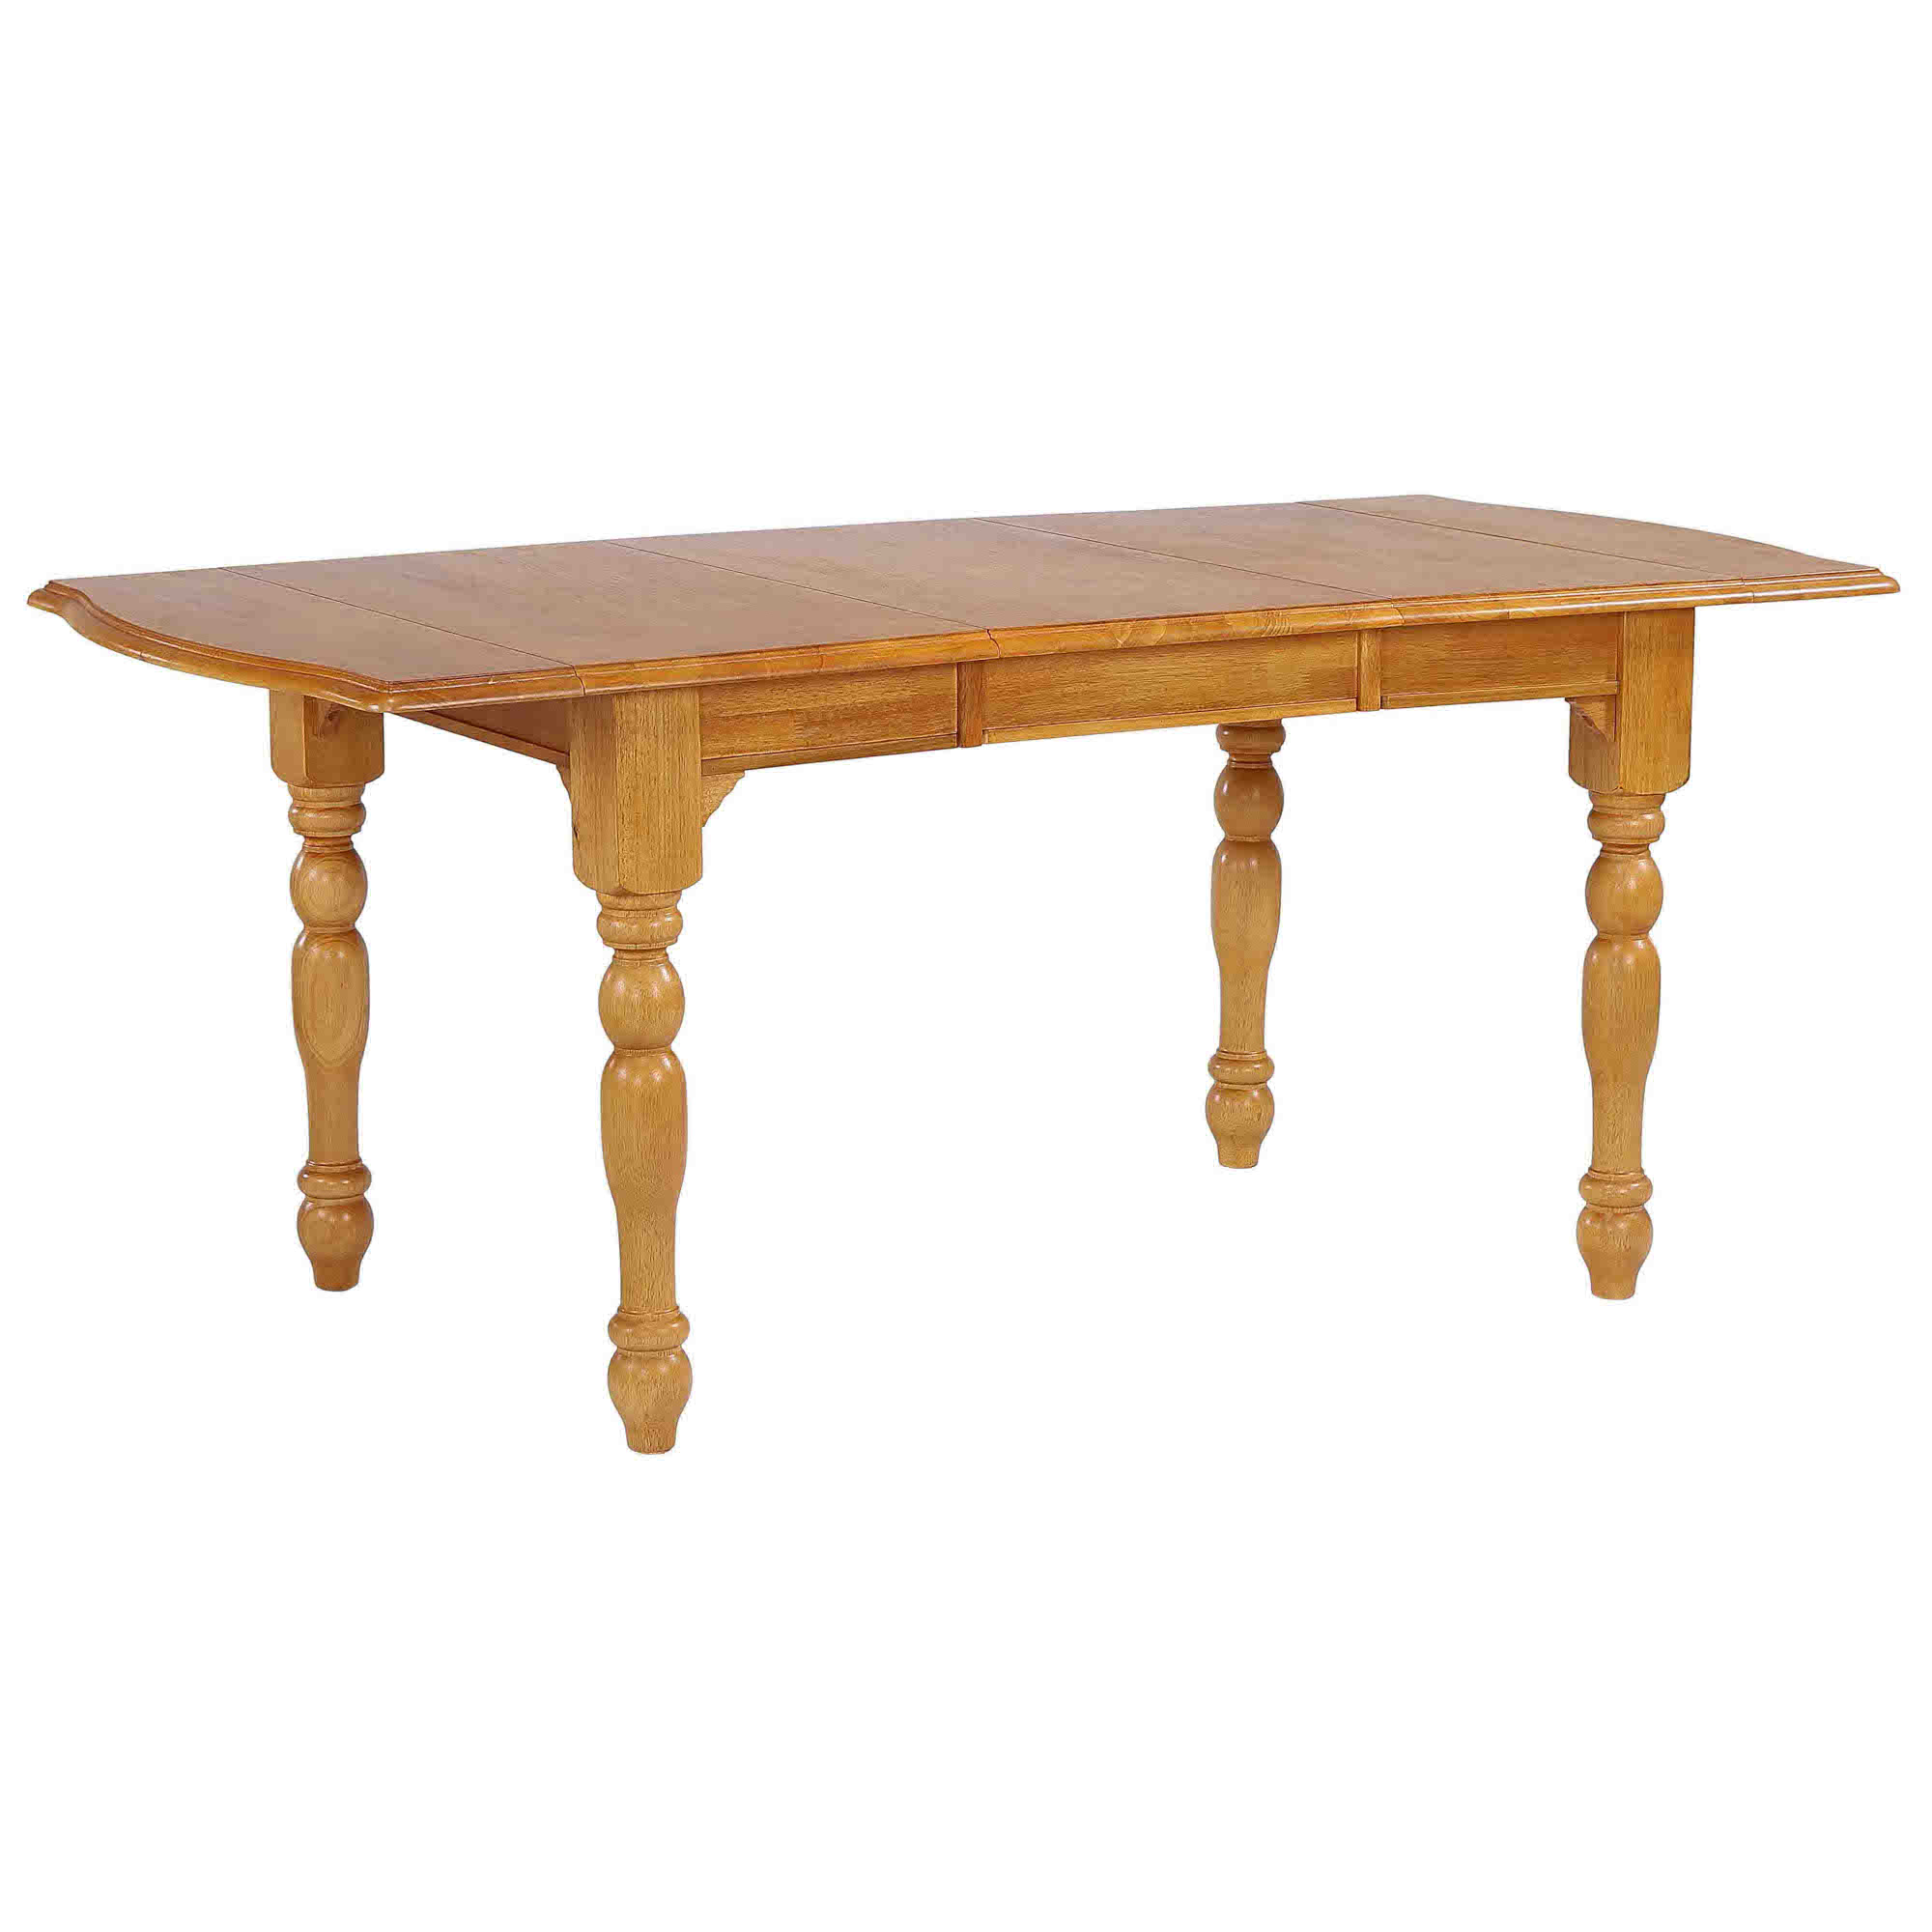 Picture of Sunset Trading Drop Leaf Extension Dining Table in Light Oak Finish